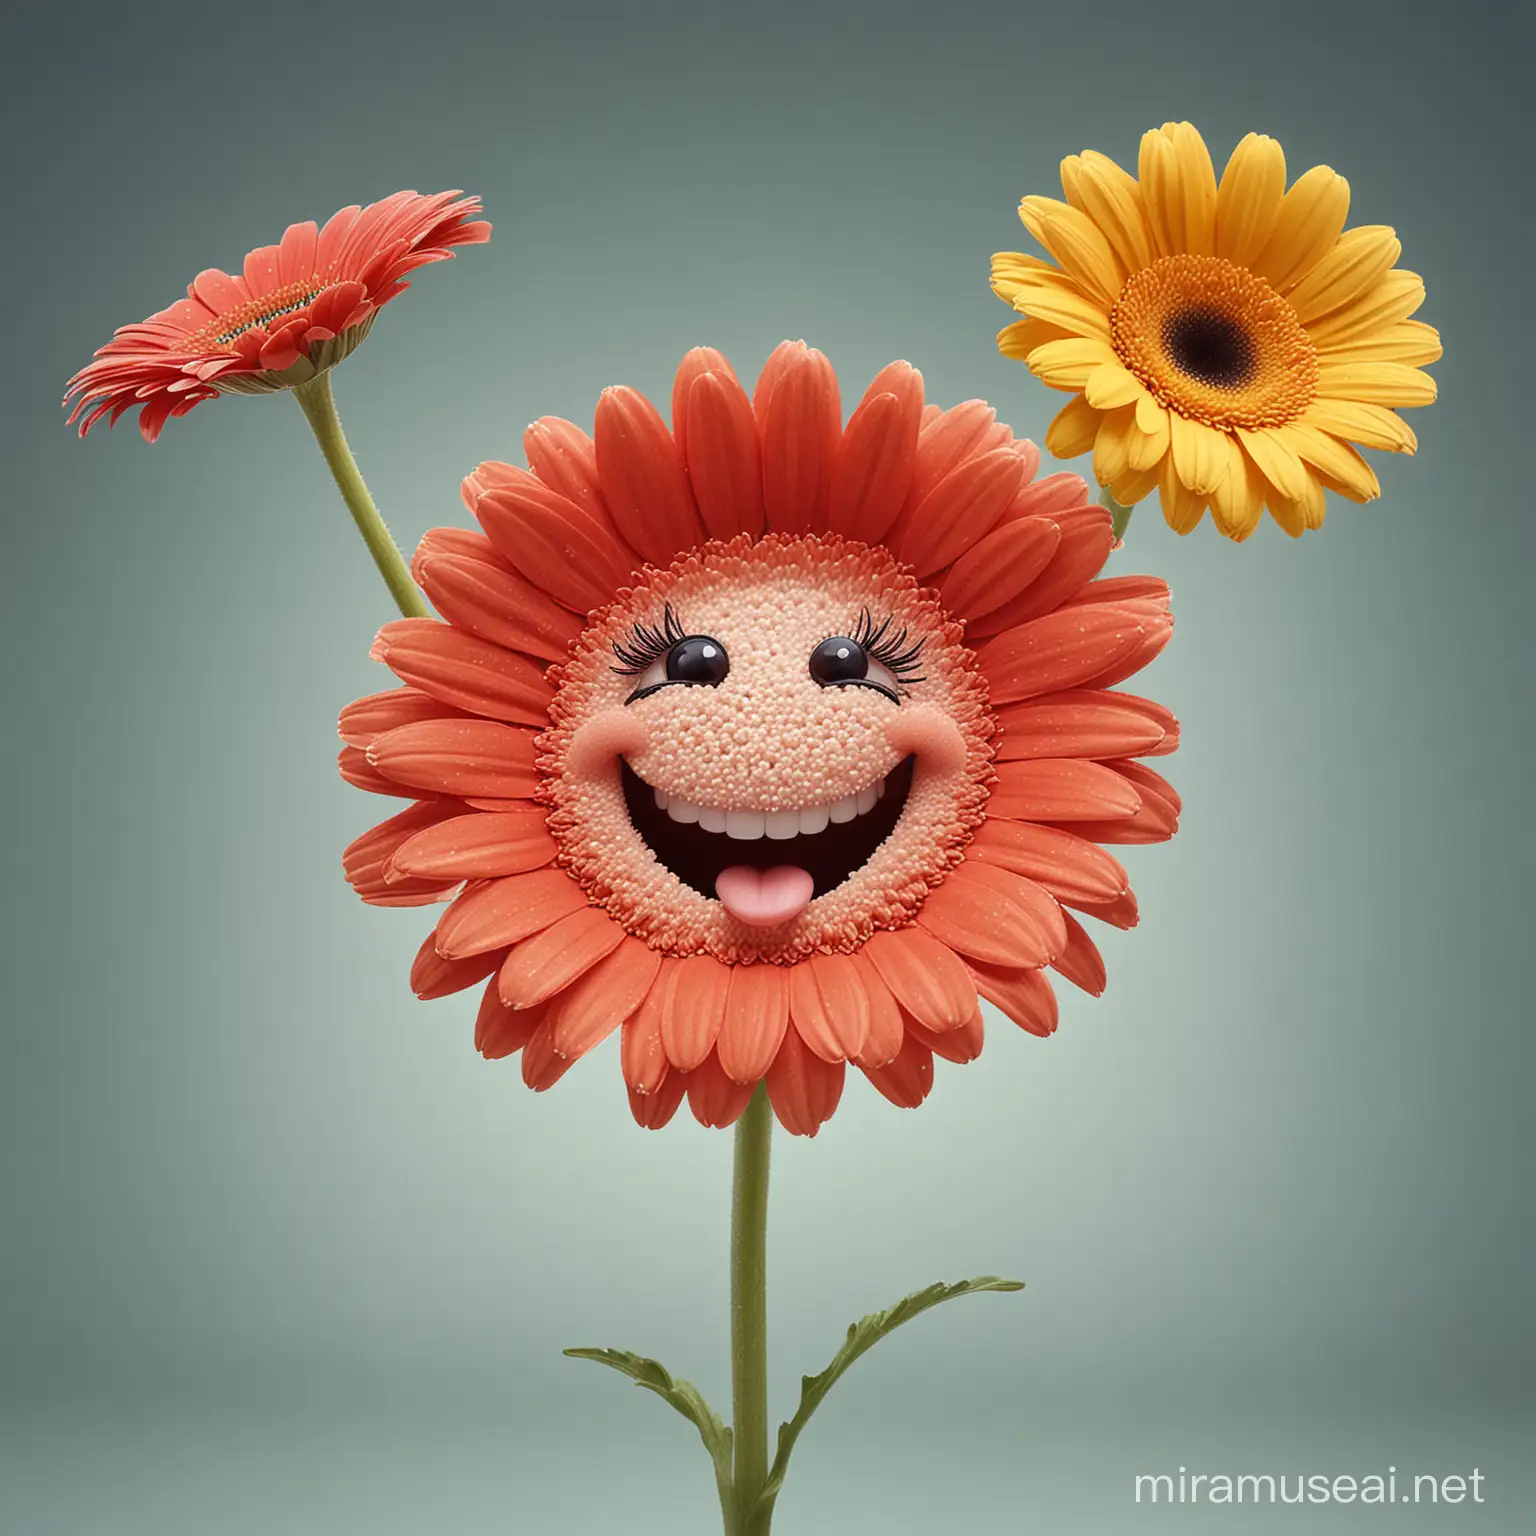 Cheerful Gerbera Flower Pointing Down in Fairy Tale Style